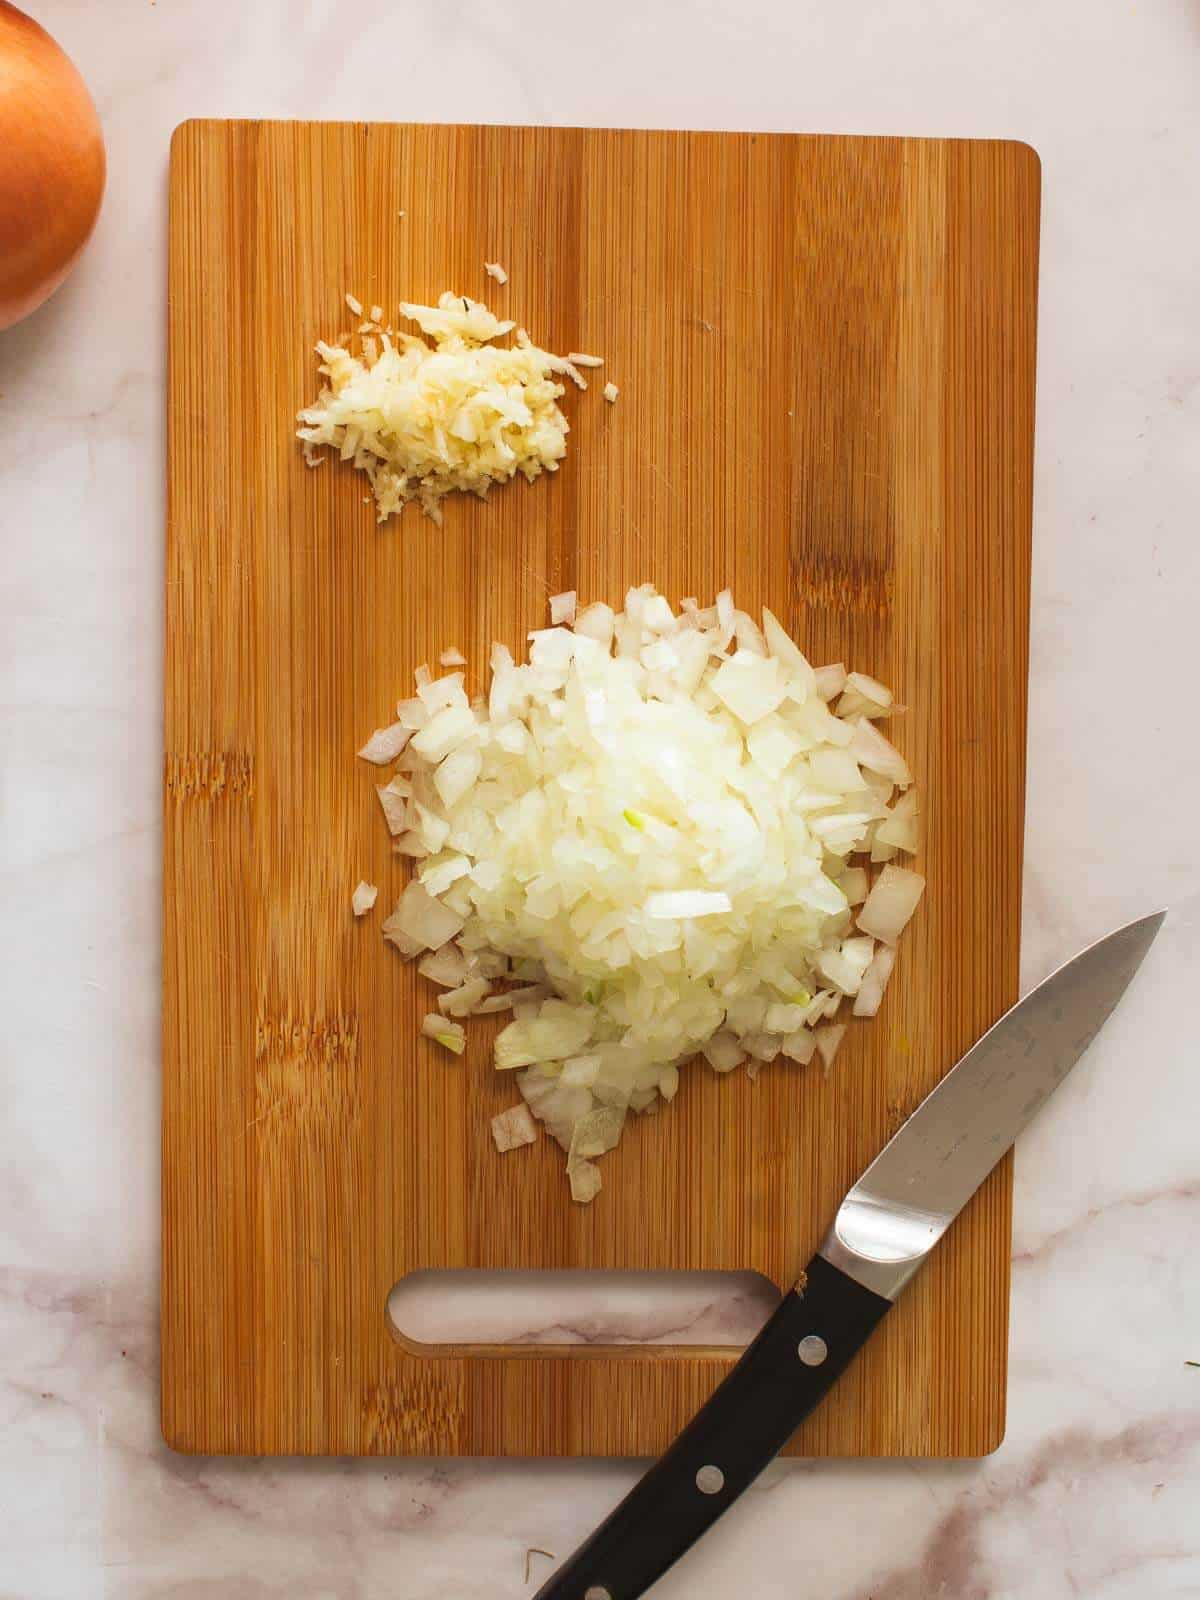 finely chop the onion and mince the garlic